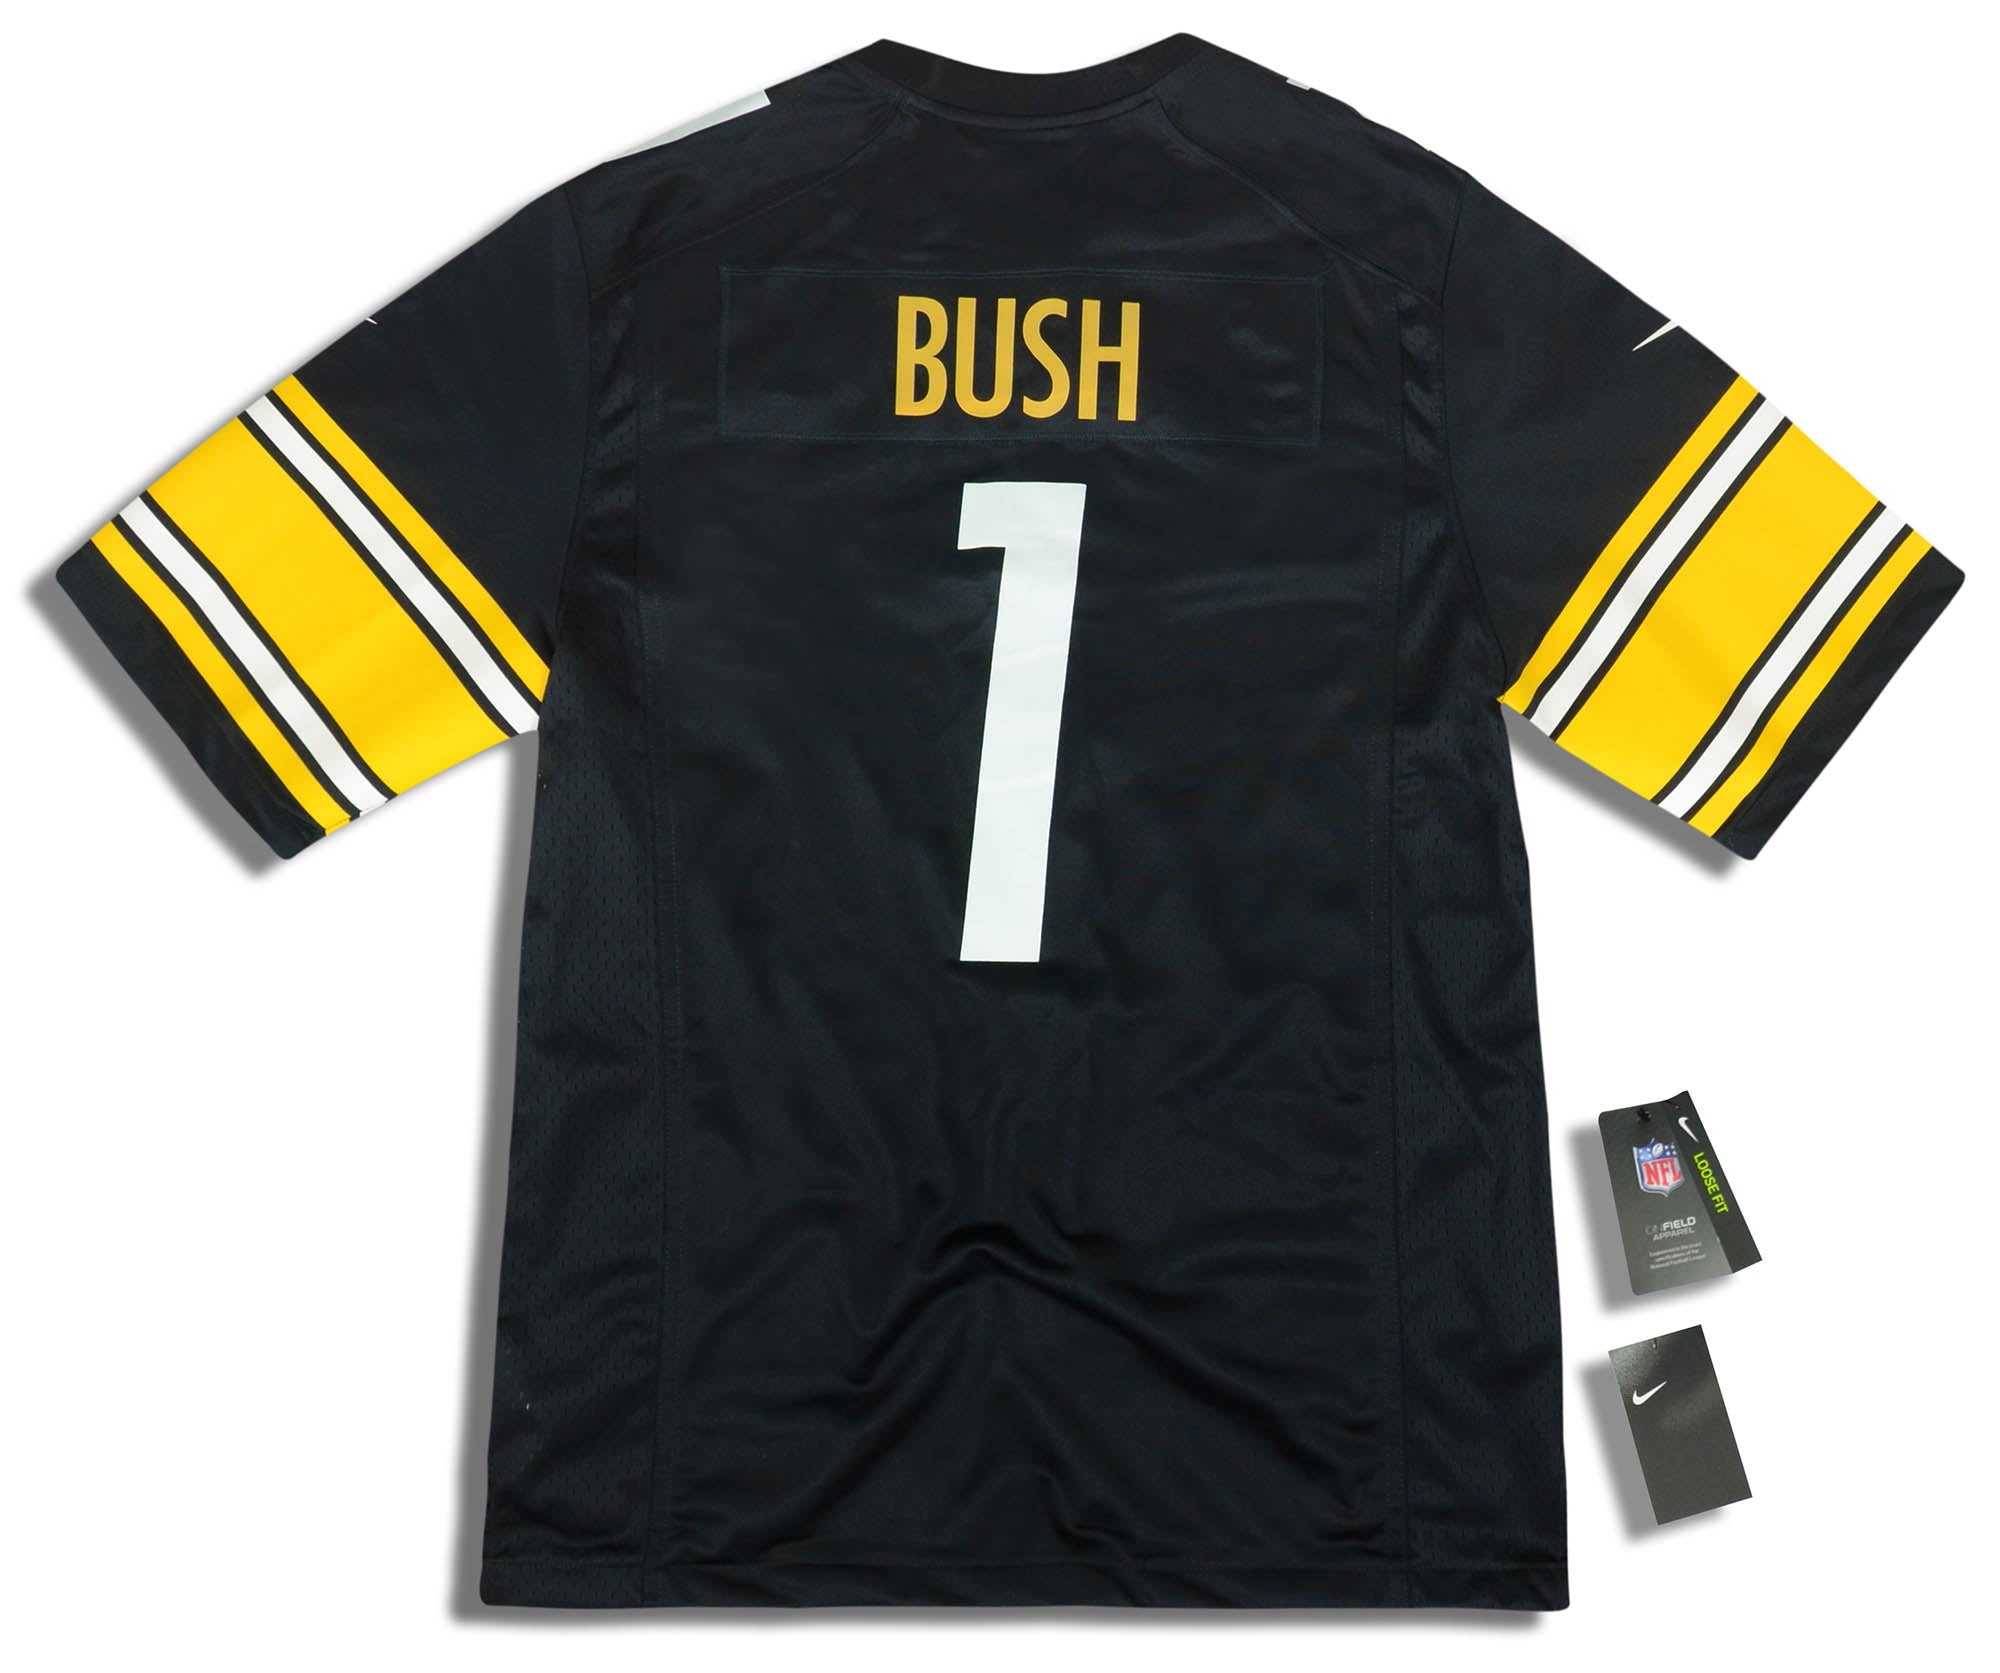 2018 PITTSBURGH STEELERS BUSH #1 NIKE GAME JERSEY (HOME) L - W/TAGS